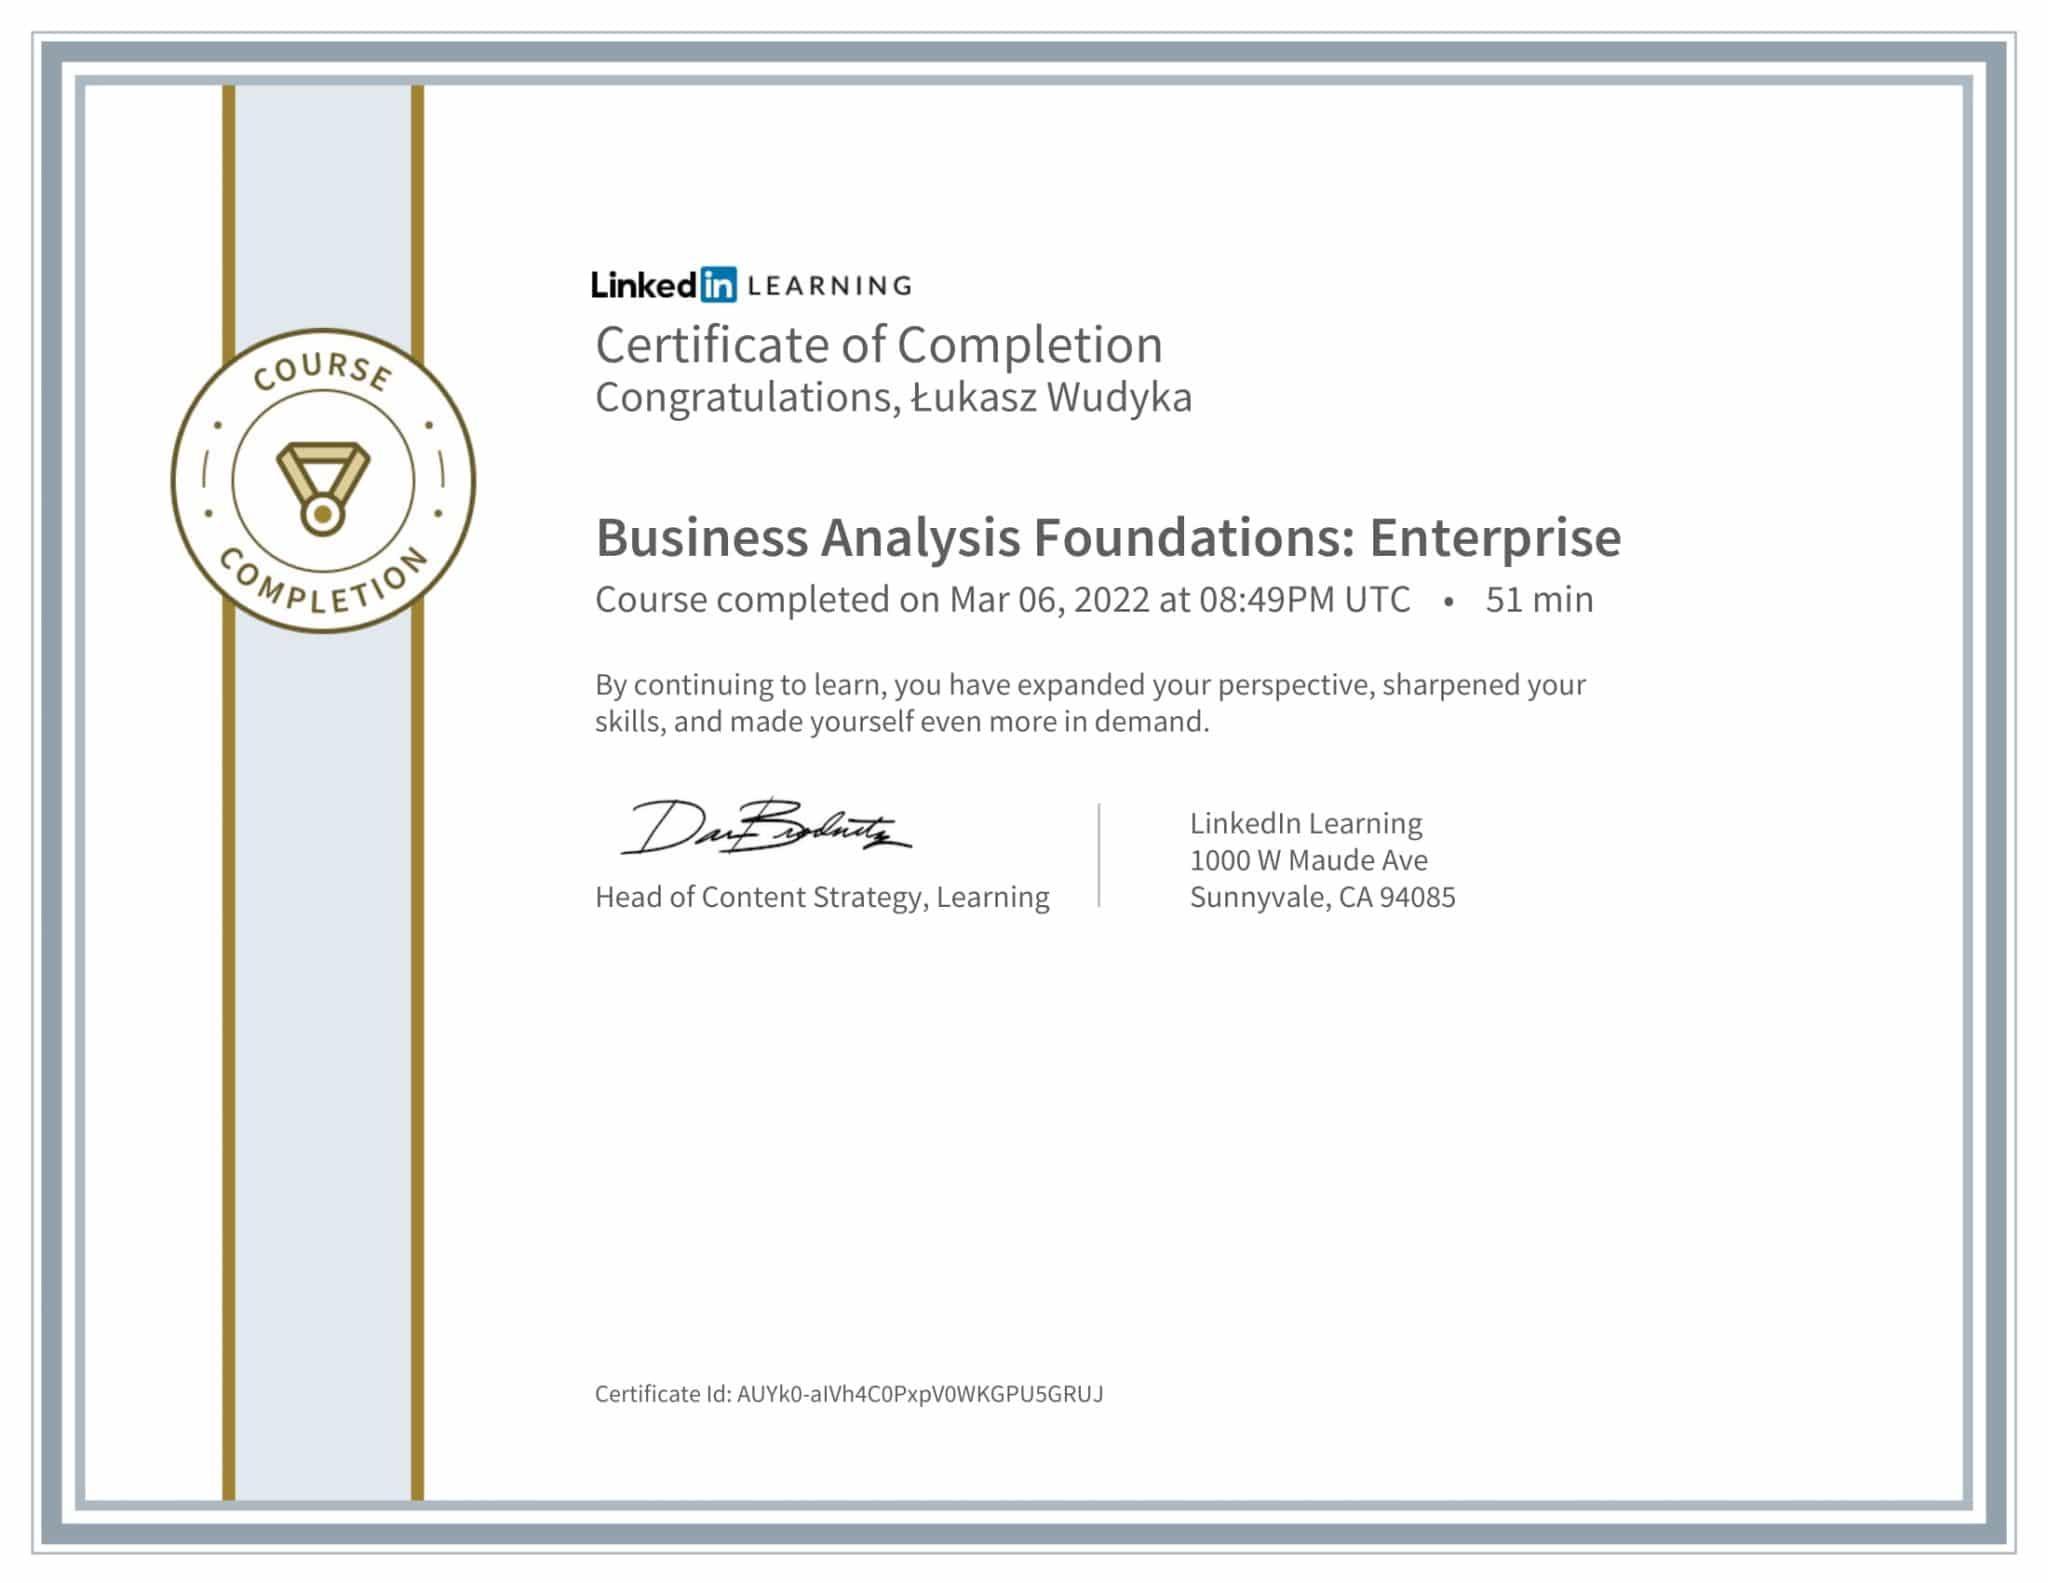 CertificateOfCompletion_Business Analysis Foundations Enterprise-1